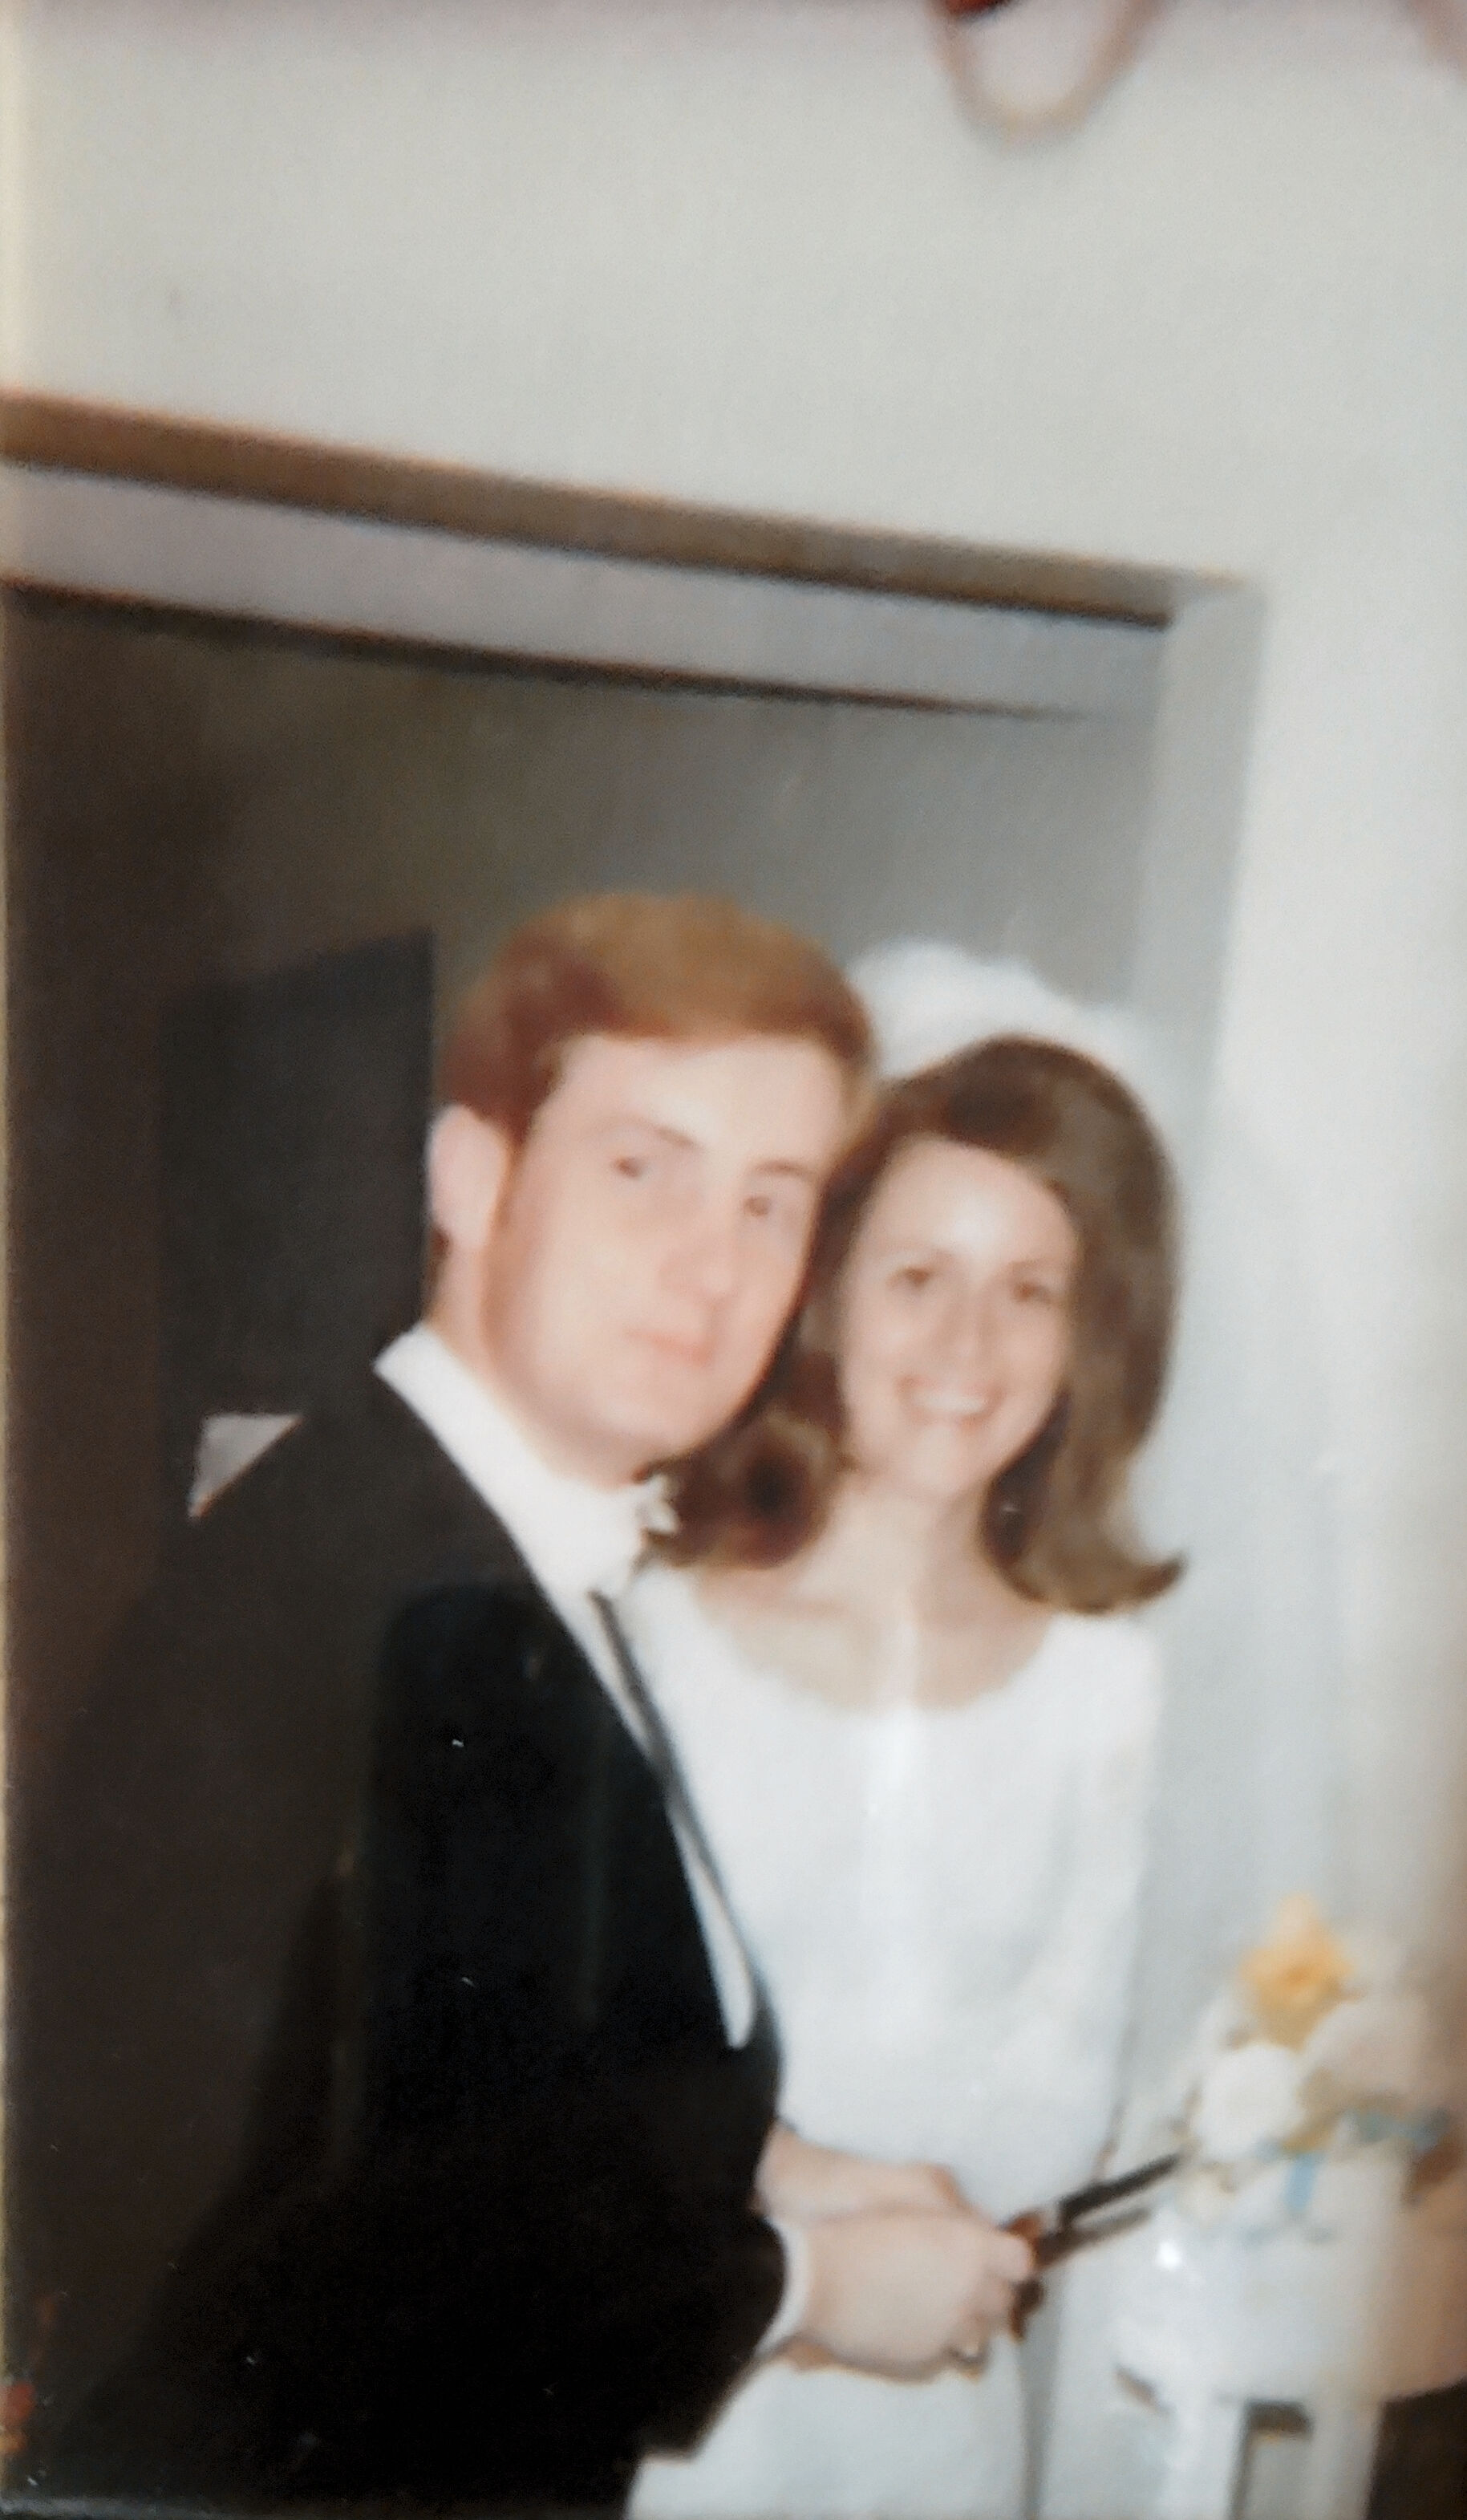 Our only picture of our wedding on June 12, 1970 which took place in Duke Umivercity  Chapel with one bridesmaid
